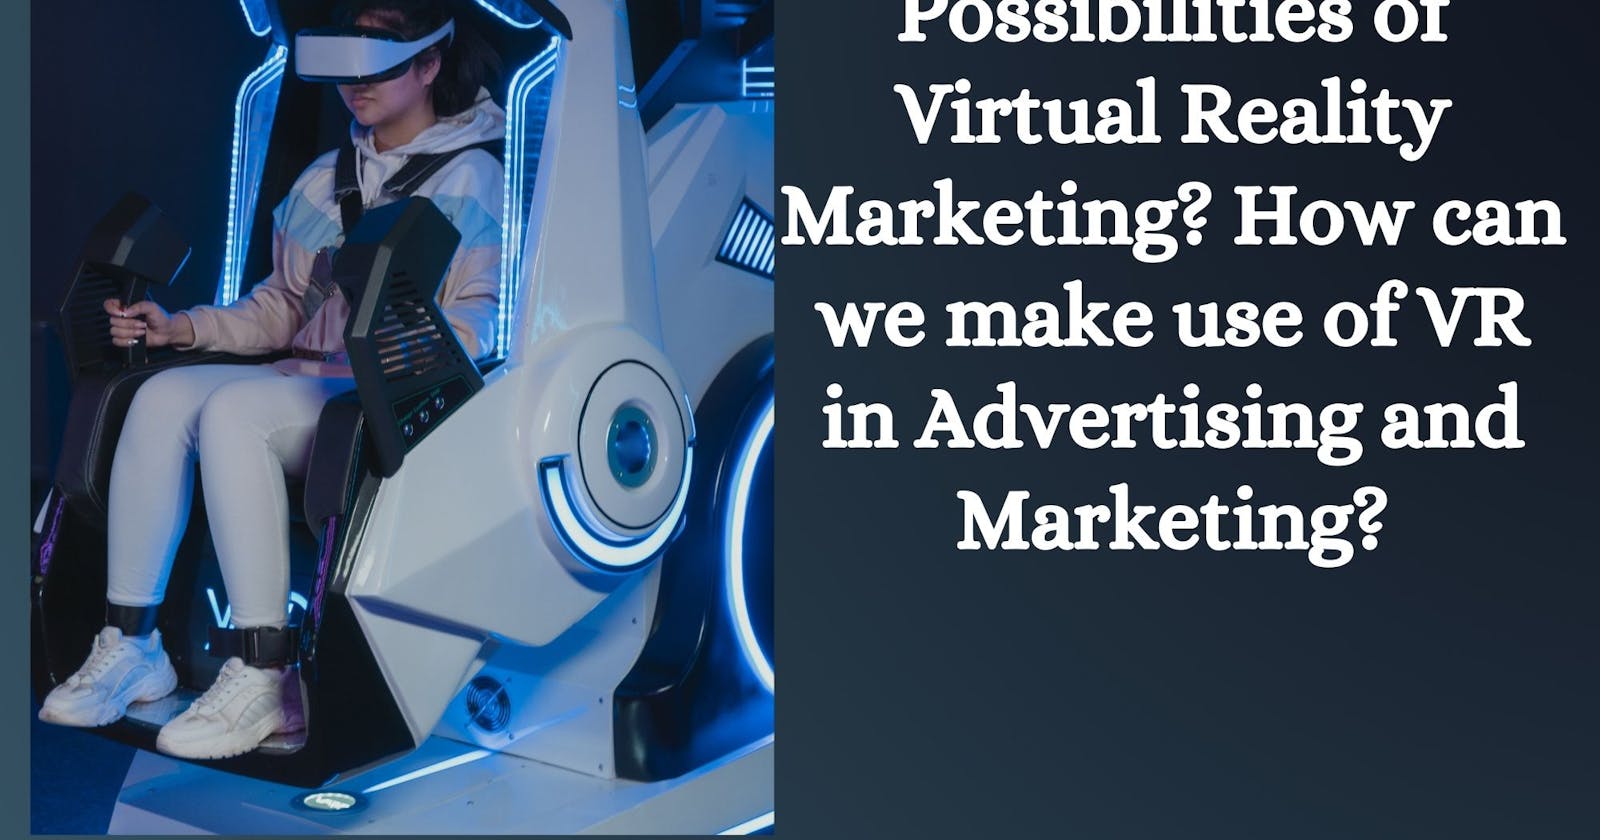 What are the Possibilities of Virtual Reality Marketing? How can we make use of VR in Advertising and Marketing?